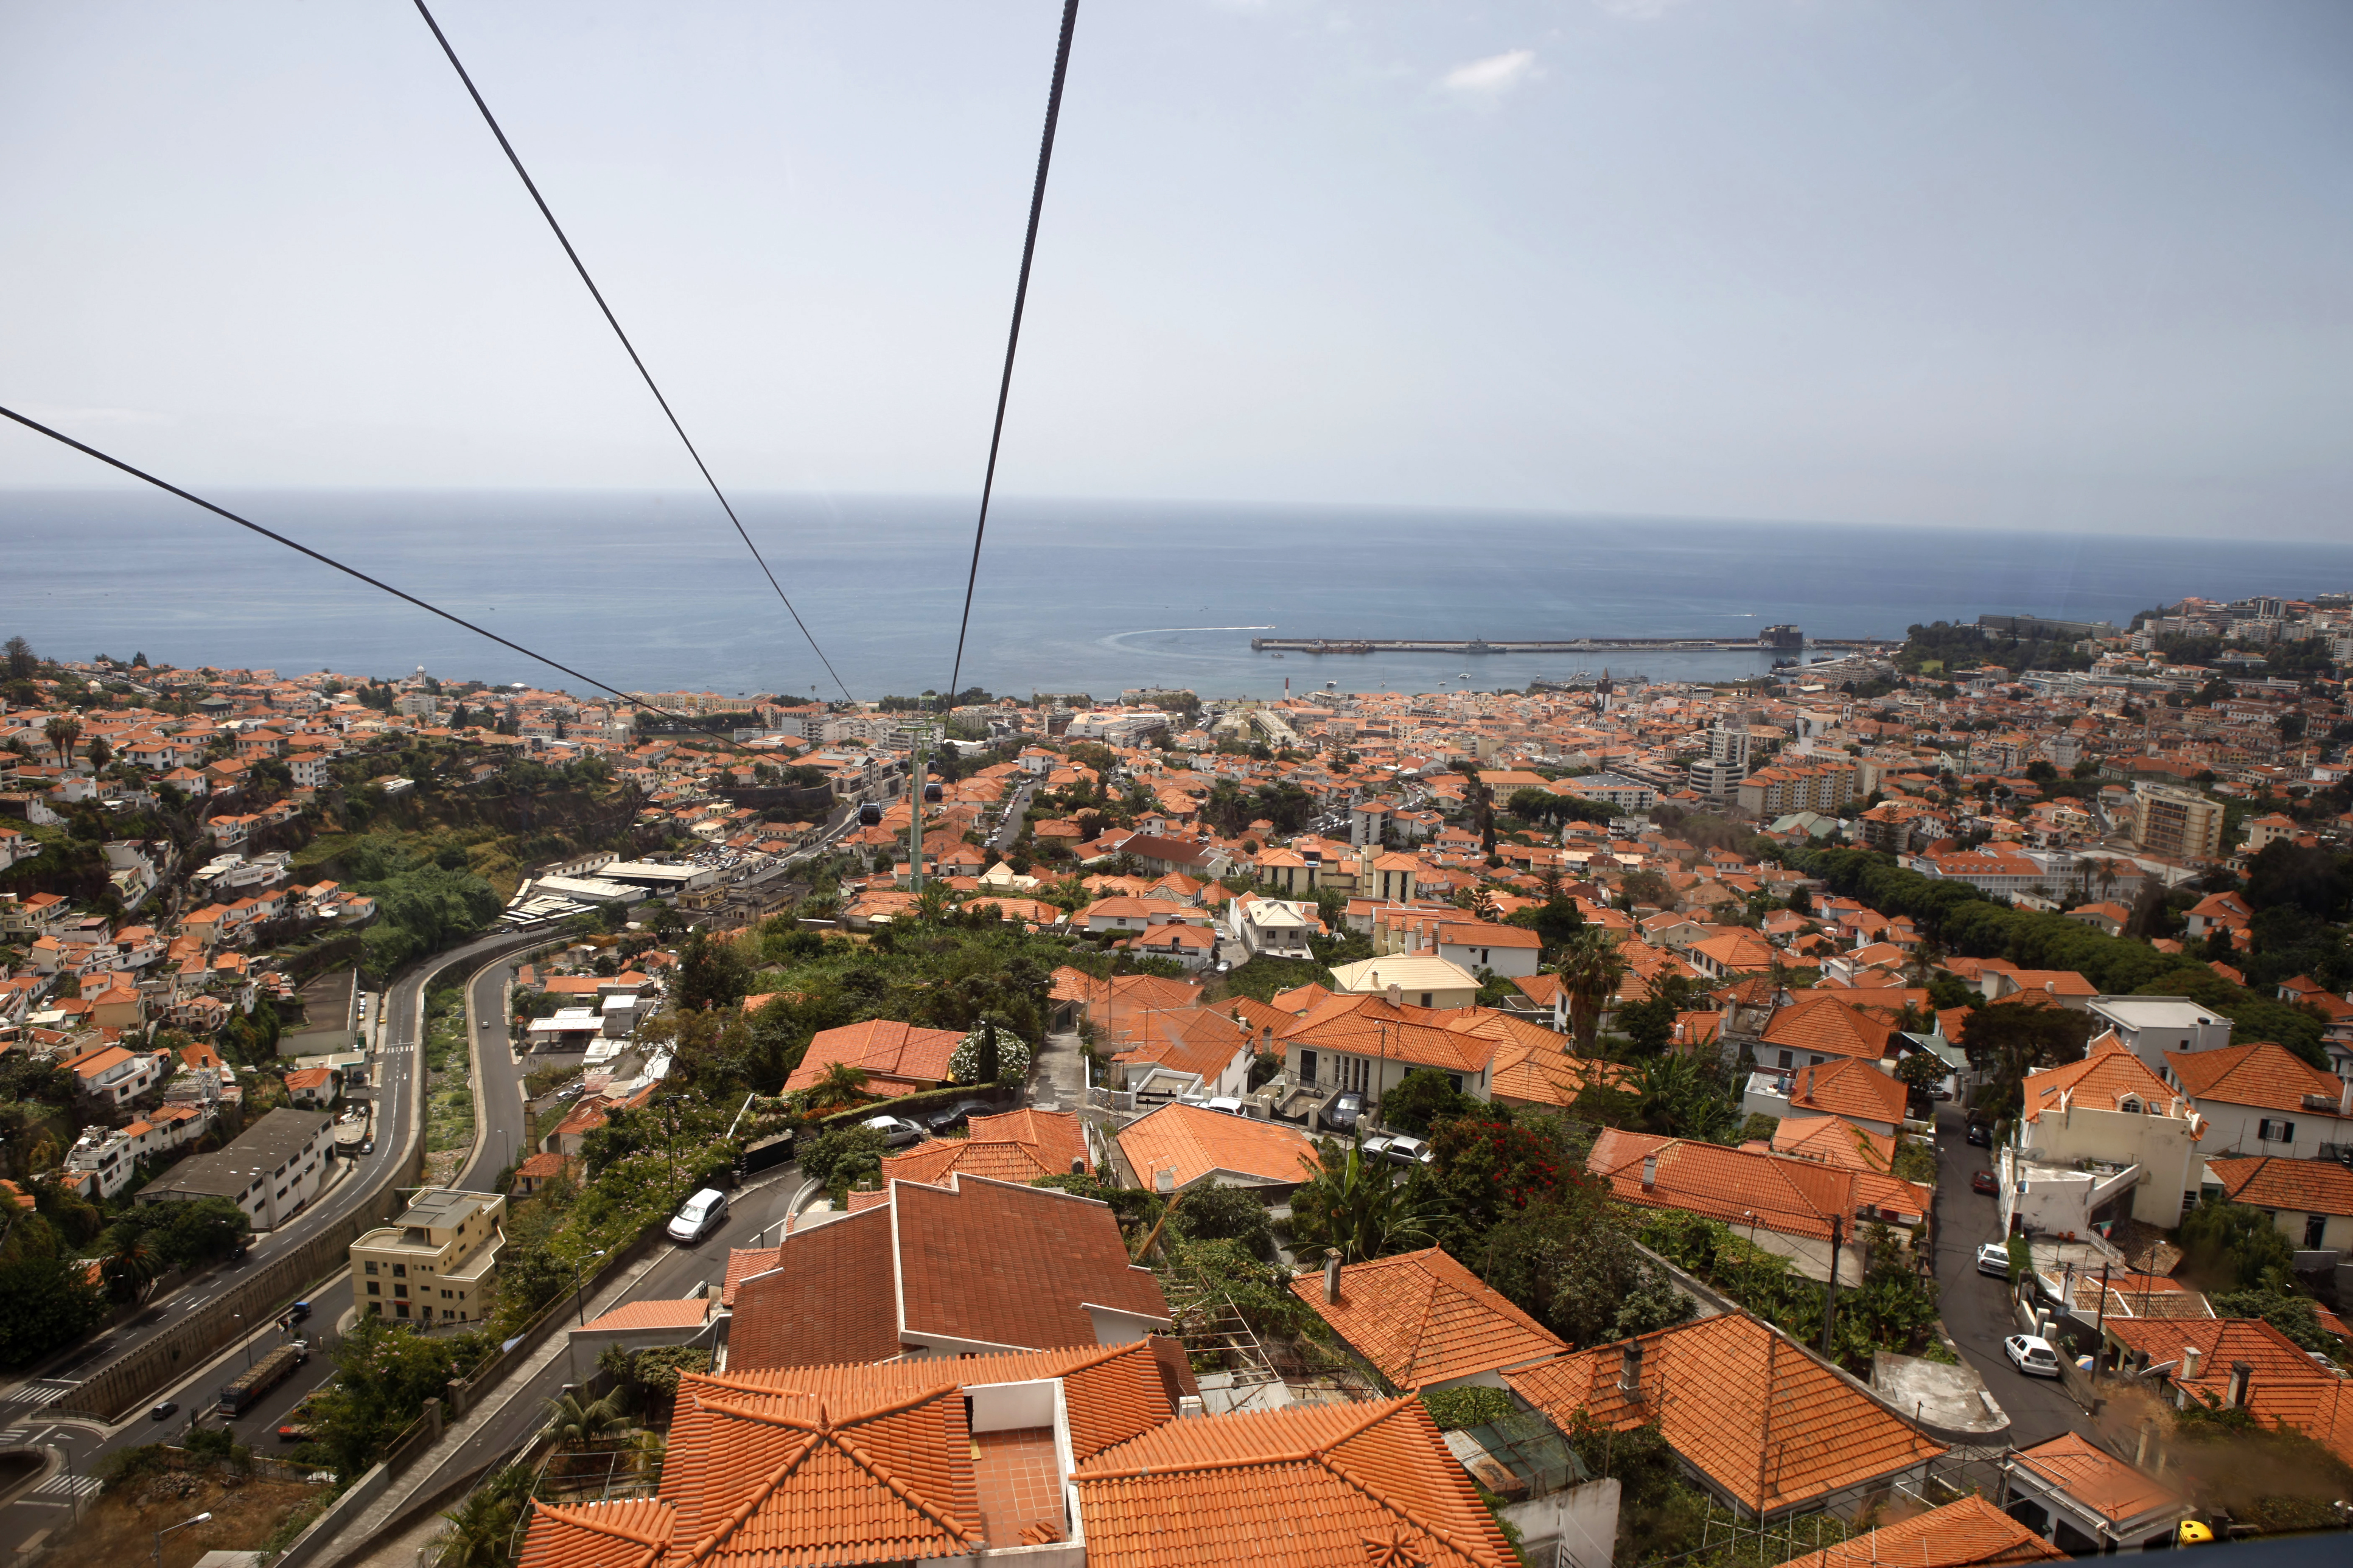 Cable car over Funchal, Madeira